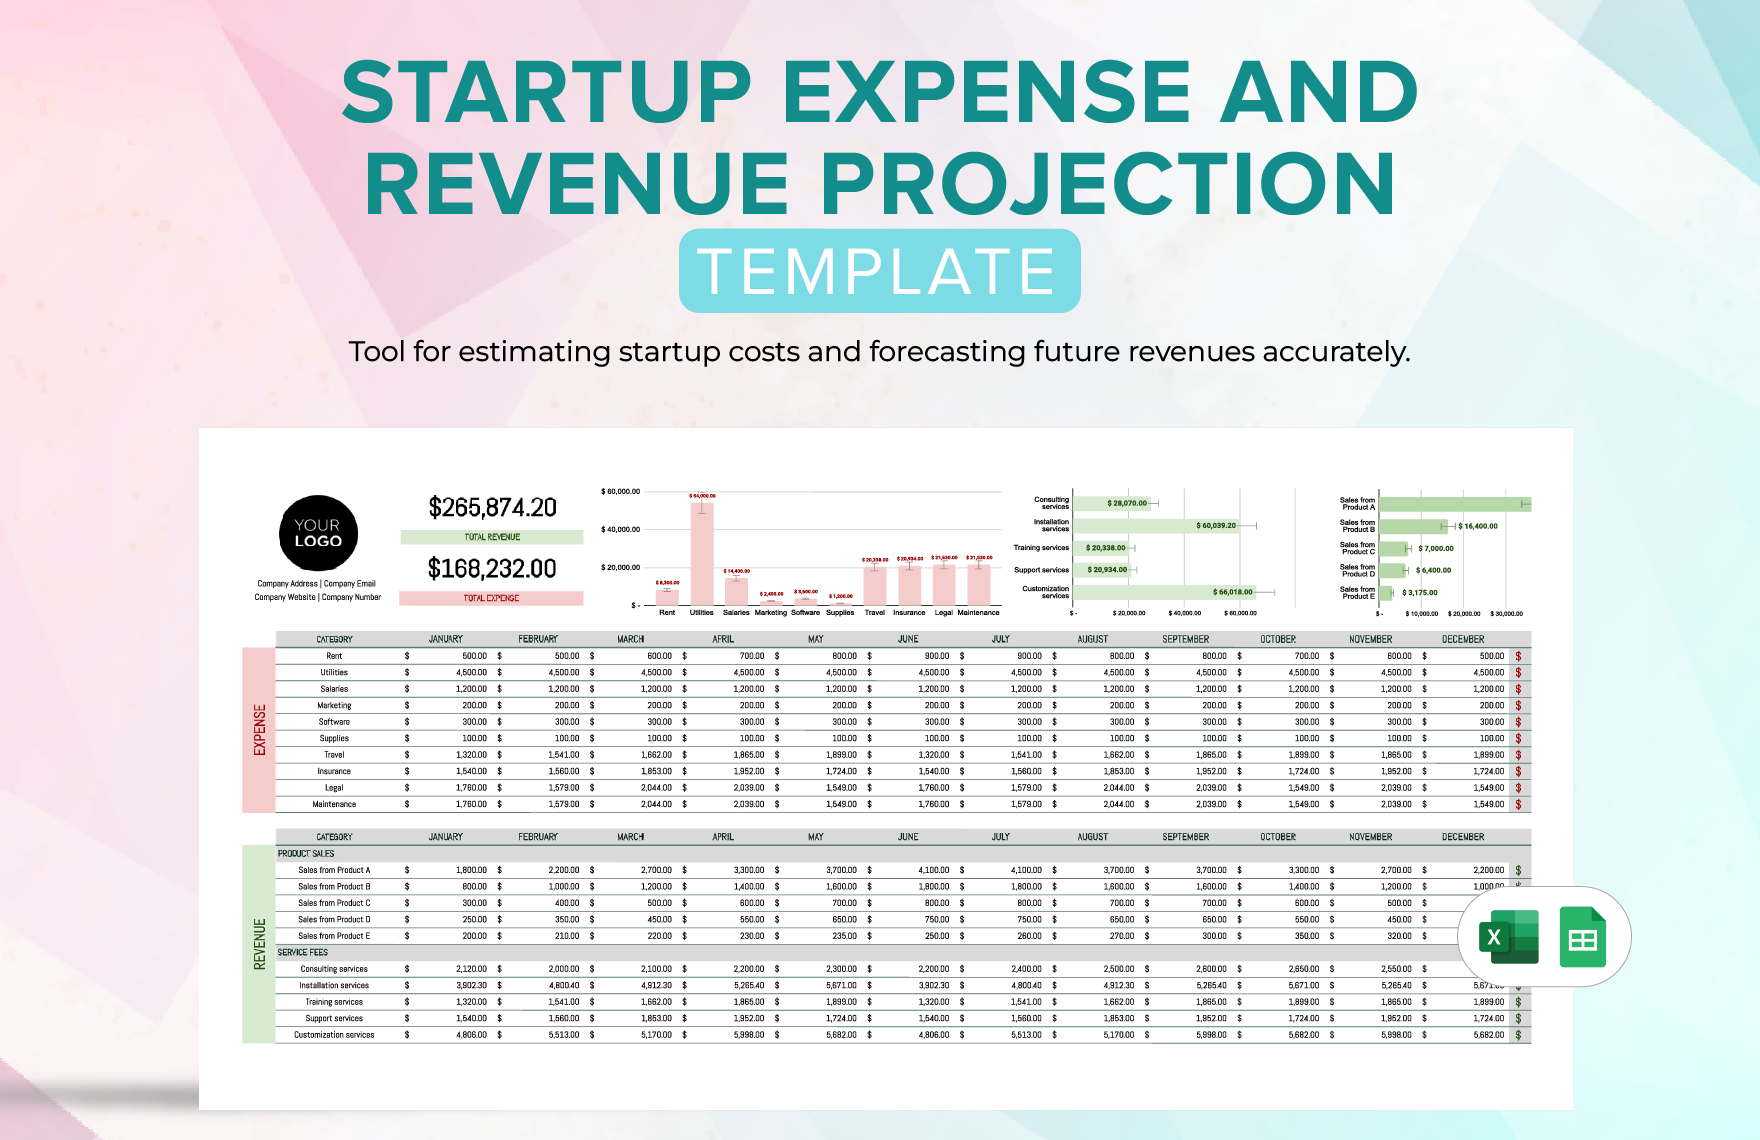 Startup Expense and Revenue Projection Template in Excel, Google Sheets